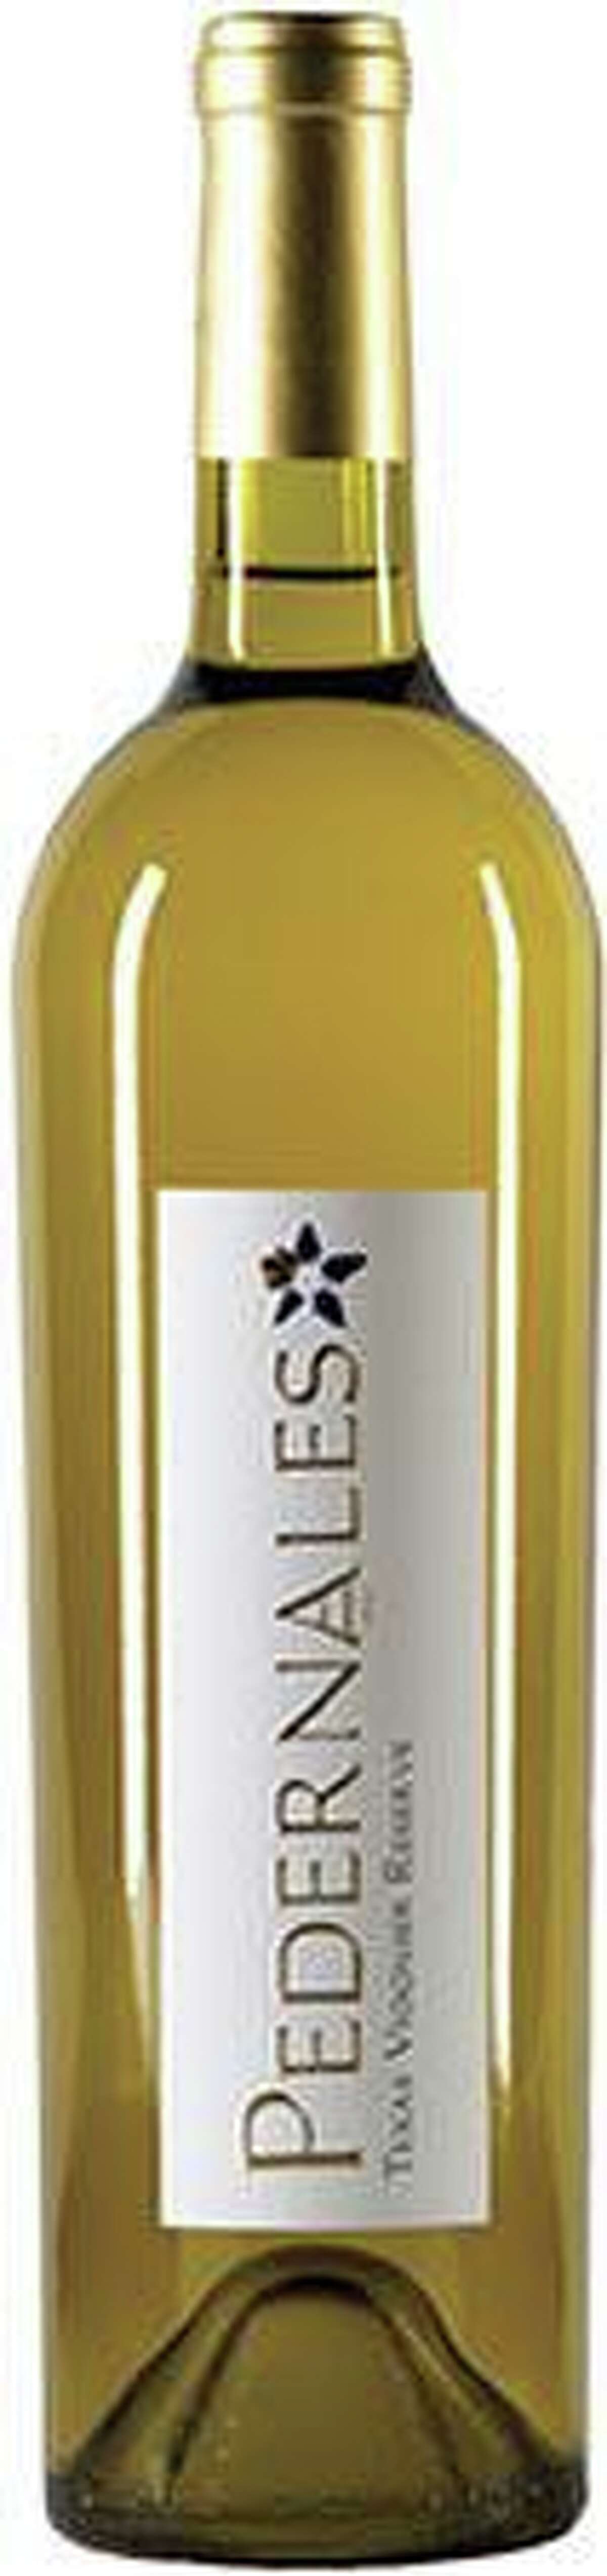 Texas consistently makes some of the best Viognier in the world earning Double Gold Medals and acclaim from people all over the world. Although this wine is grown in other areas like California, blind taste tests consistently place this Texas white wine in the top.